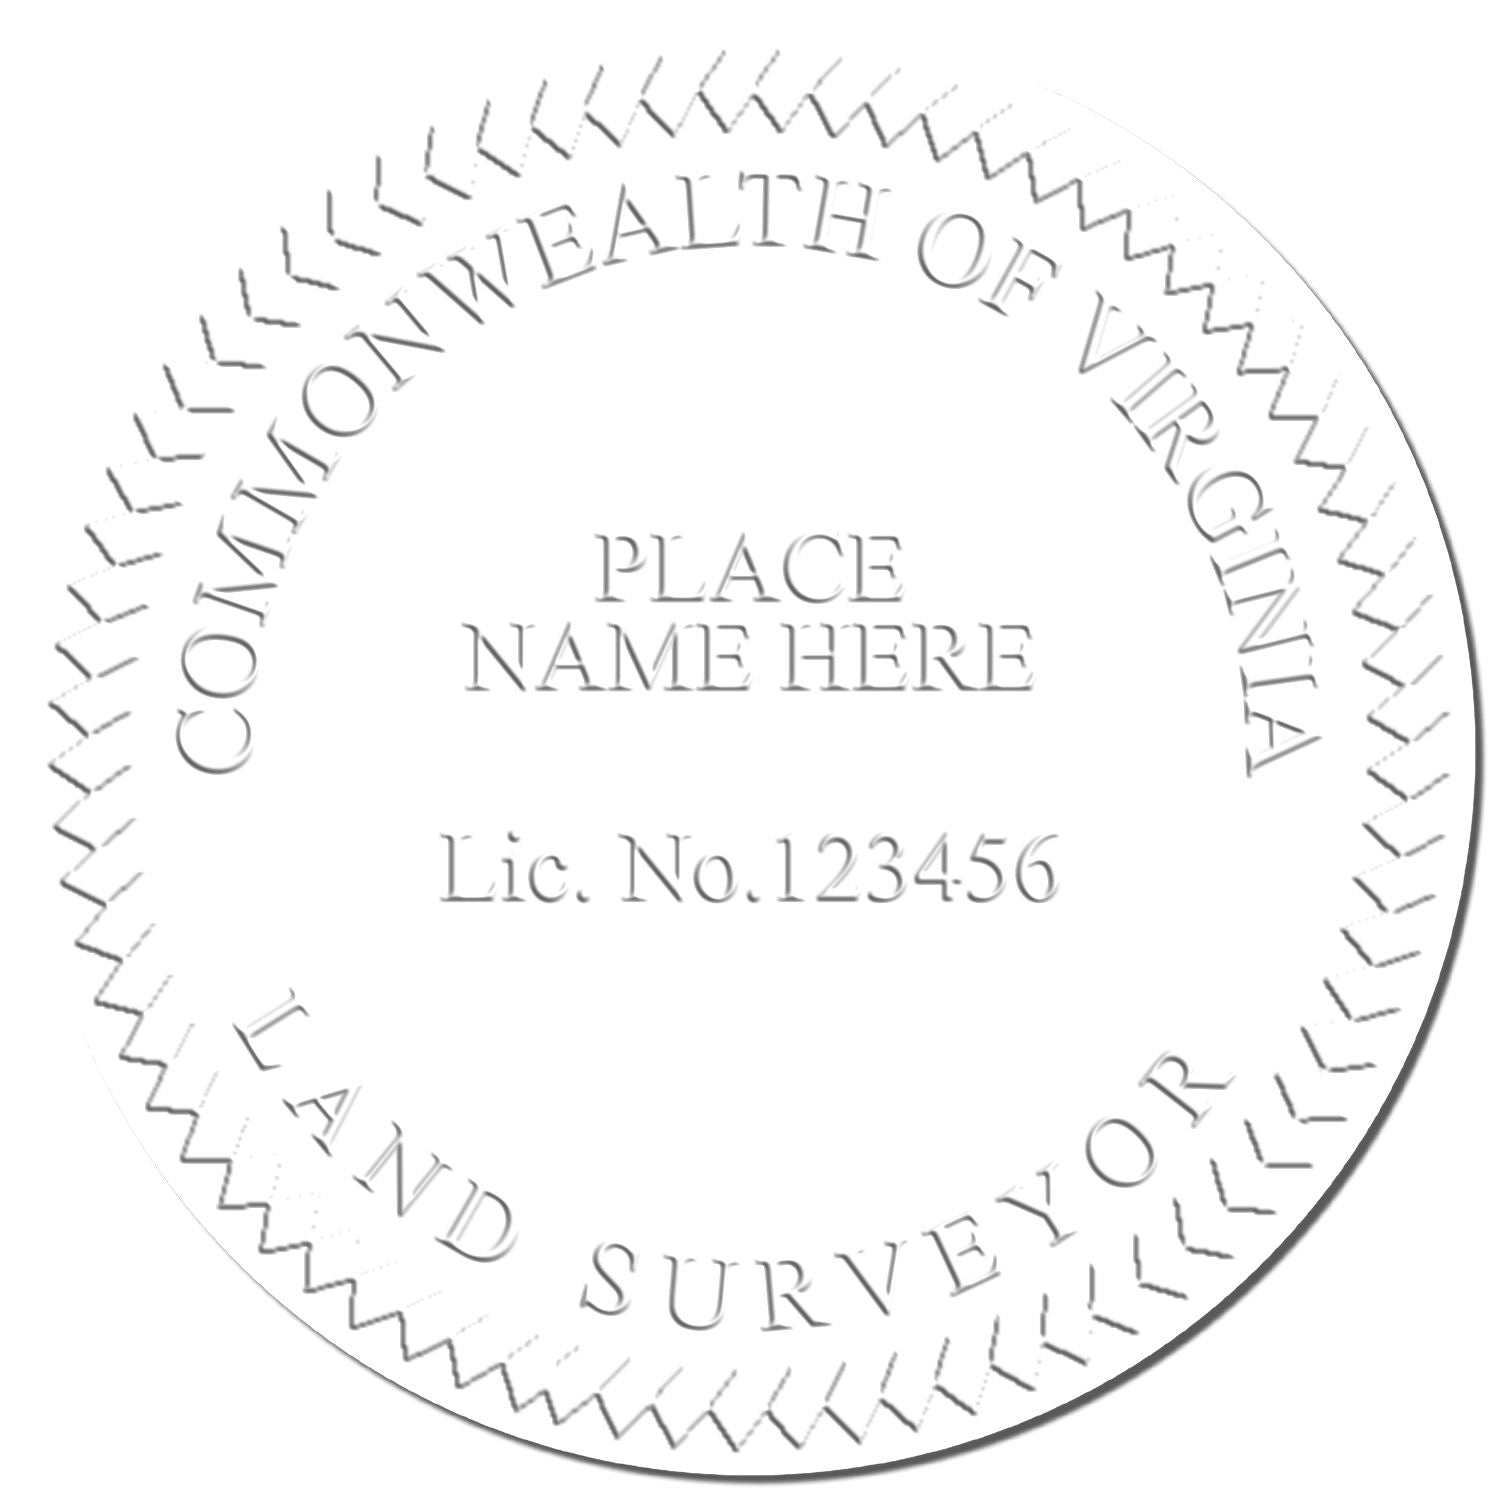 This paper is stamped with a sample imprint of the Heavy Duty Cast Iron Virginia Land Surveyor Seal Embosser, signifying its quality and reliability.